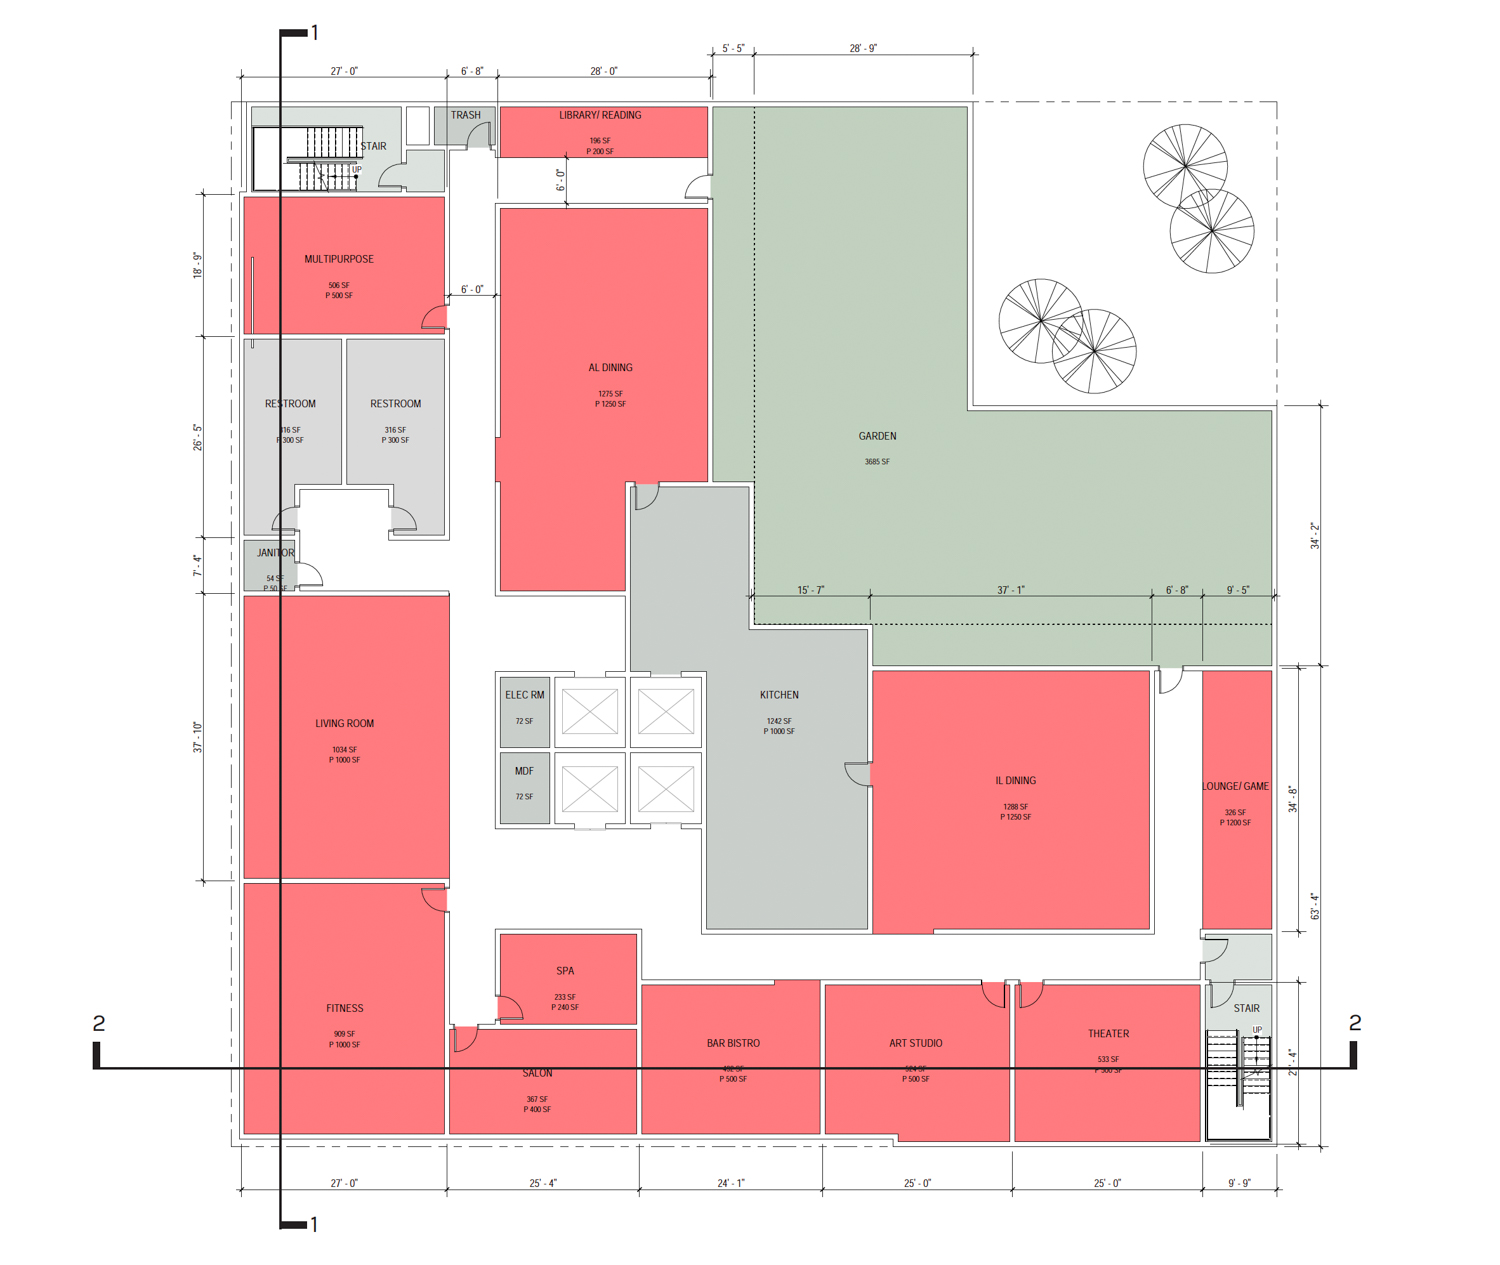 1270 Bush Street second level floor plan, drawing by SmithGroup